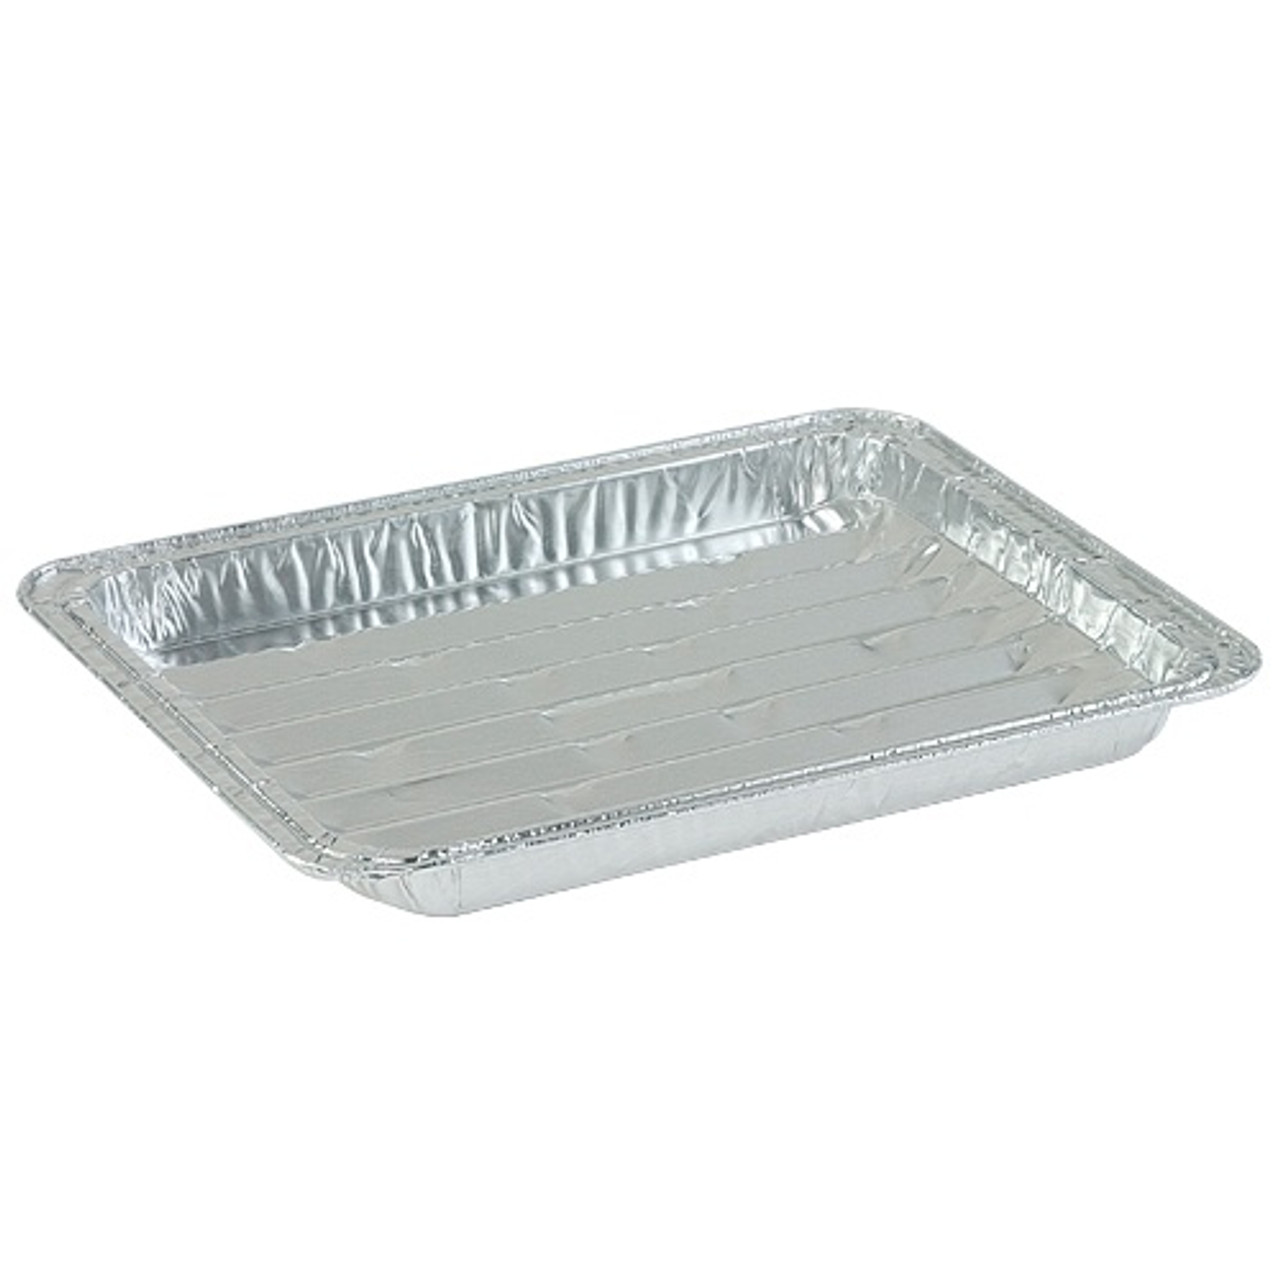 https://cdn11.bigcommerce.com/s-hgqmwywp99/images/stencil/1280x1280/products/49561/44350/broiler-aluminum-disposable-pans-100ct-4__40648.1675880333.jpg?c=1?imbypass=on